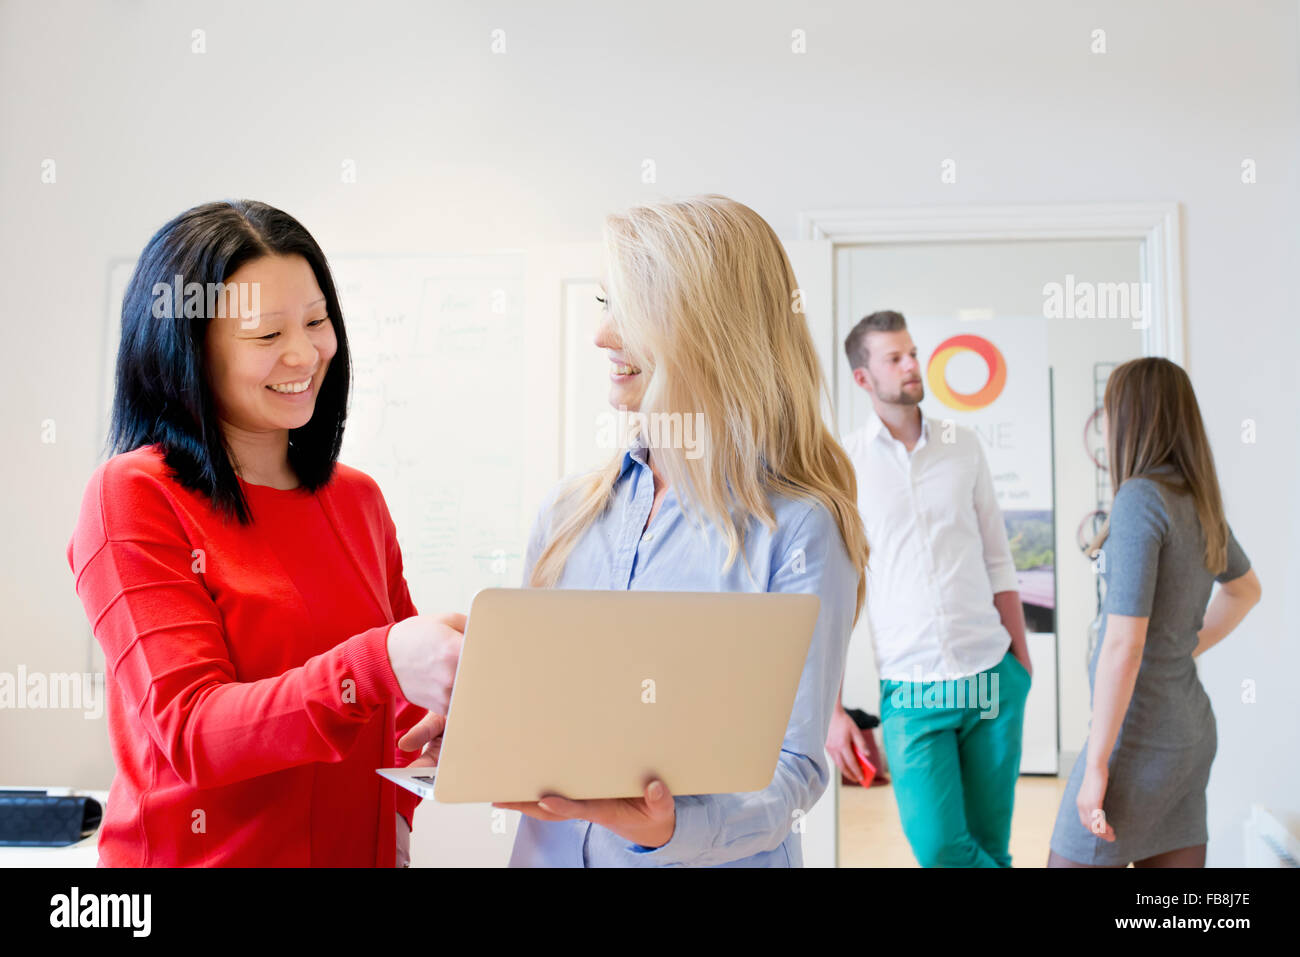 Sweden, Woman helping colleague Stock Photo